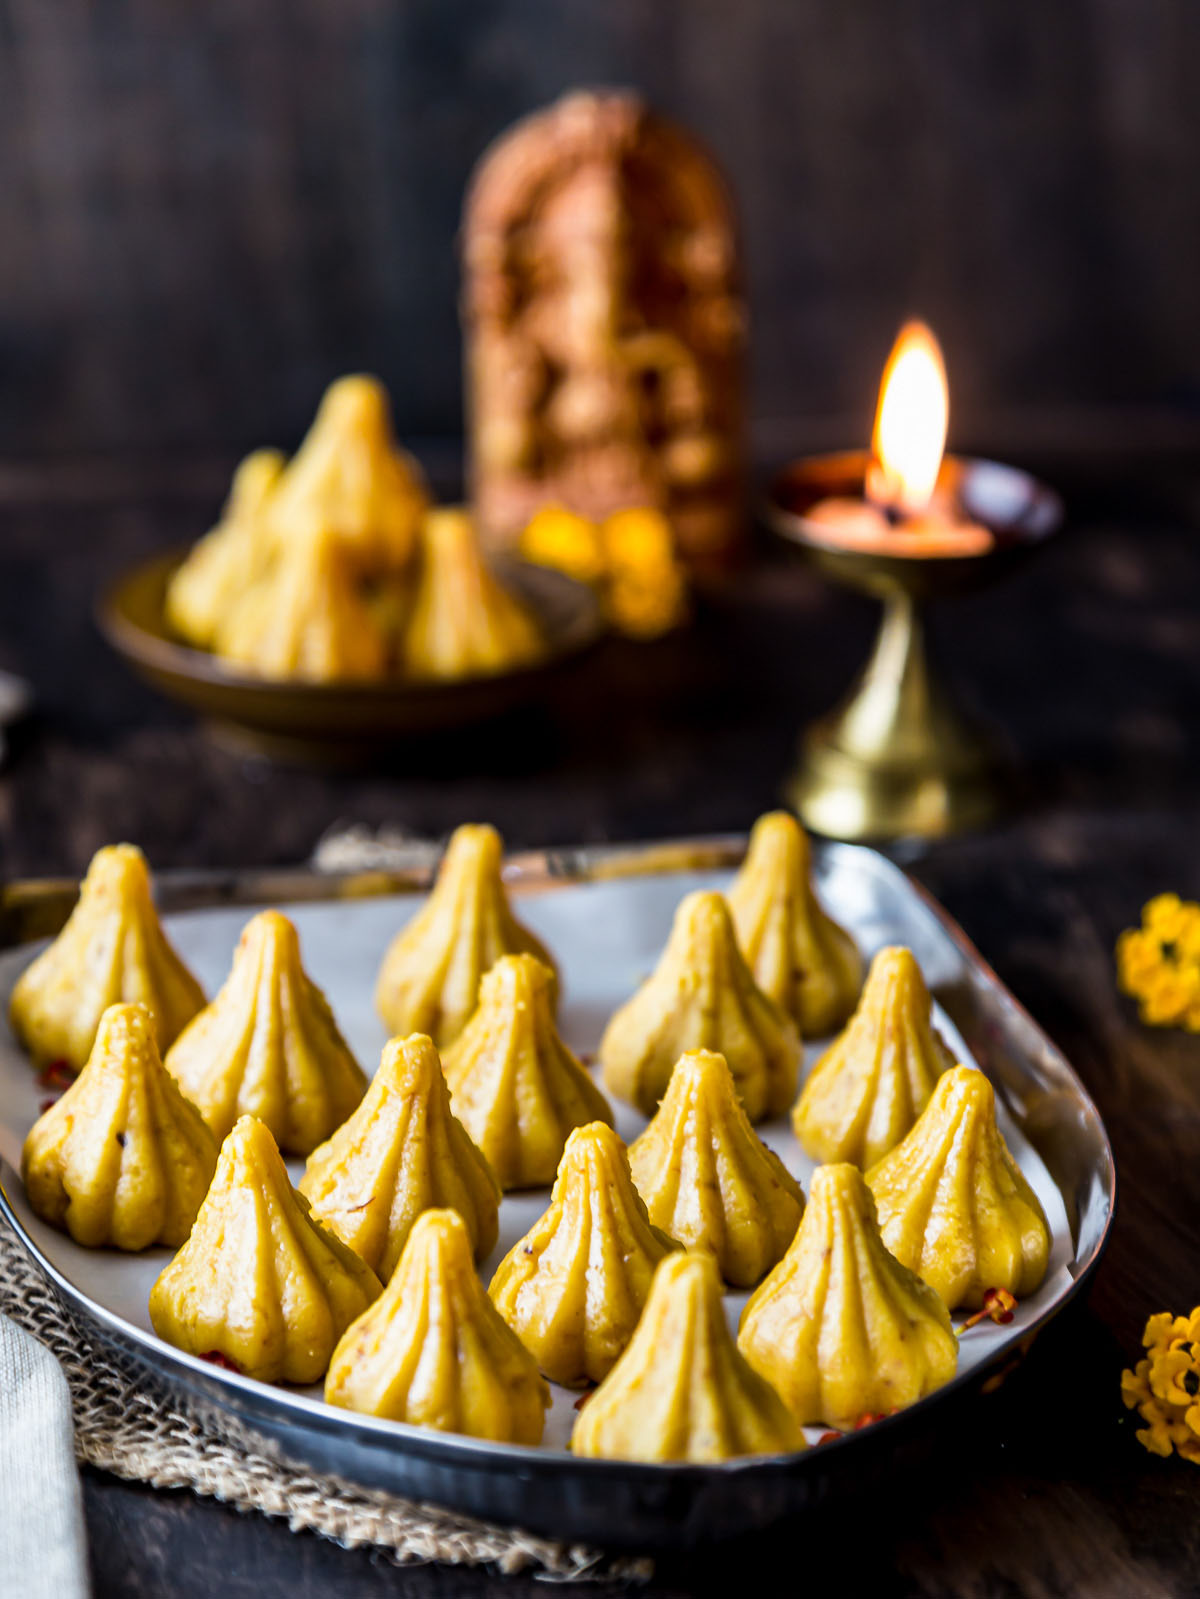 front view of yellow Modak arranged on a plate with light lamp and Ganesh idol behind in background